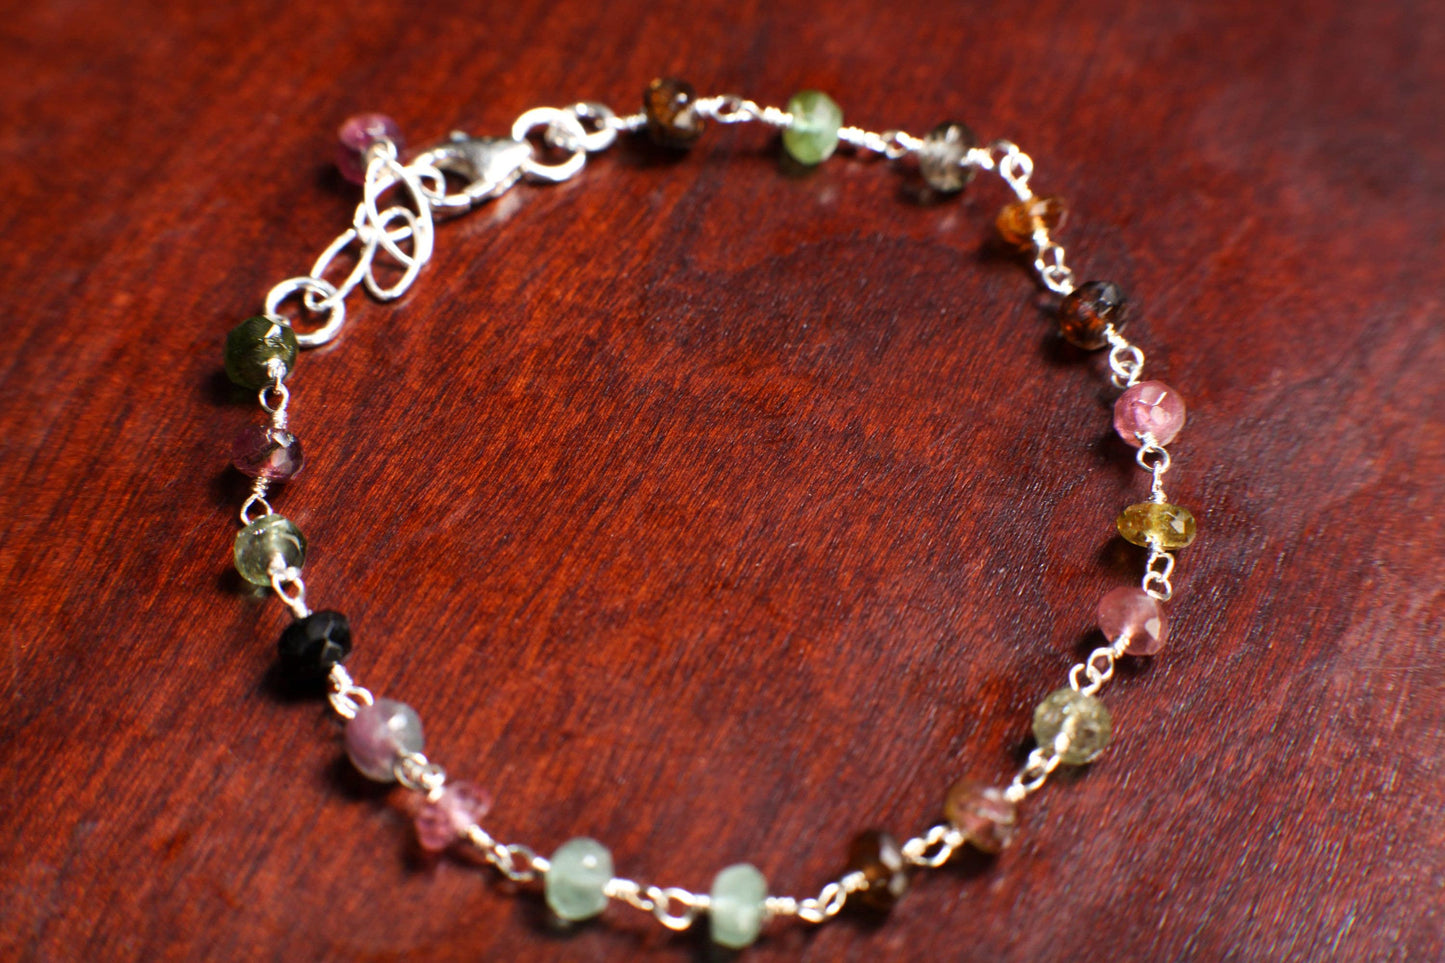 Watermelon Tourmaline Wire Wrapped Faceted large 5mm Rondelle Bracelet in 925 Sterling Silver Clasp, Gift for her